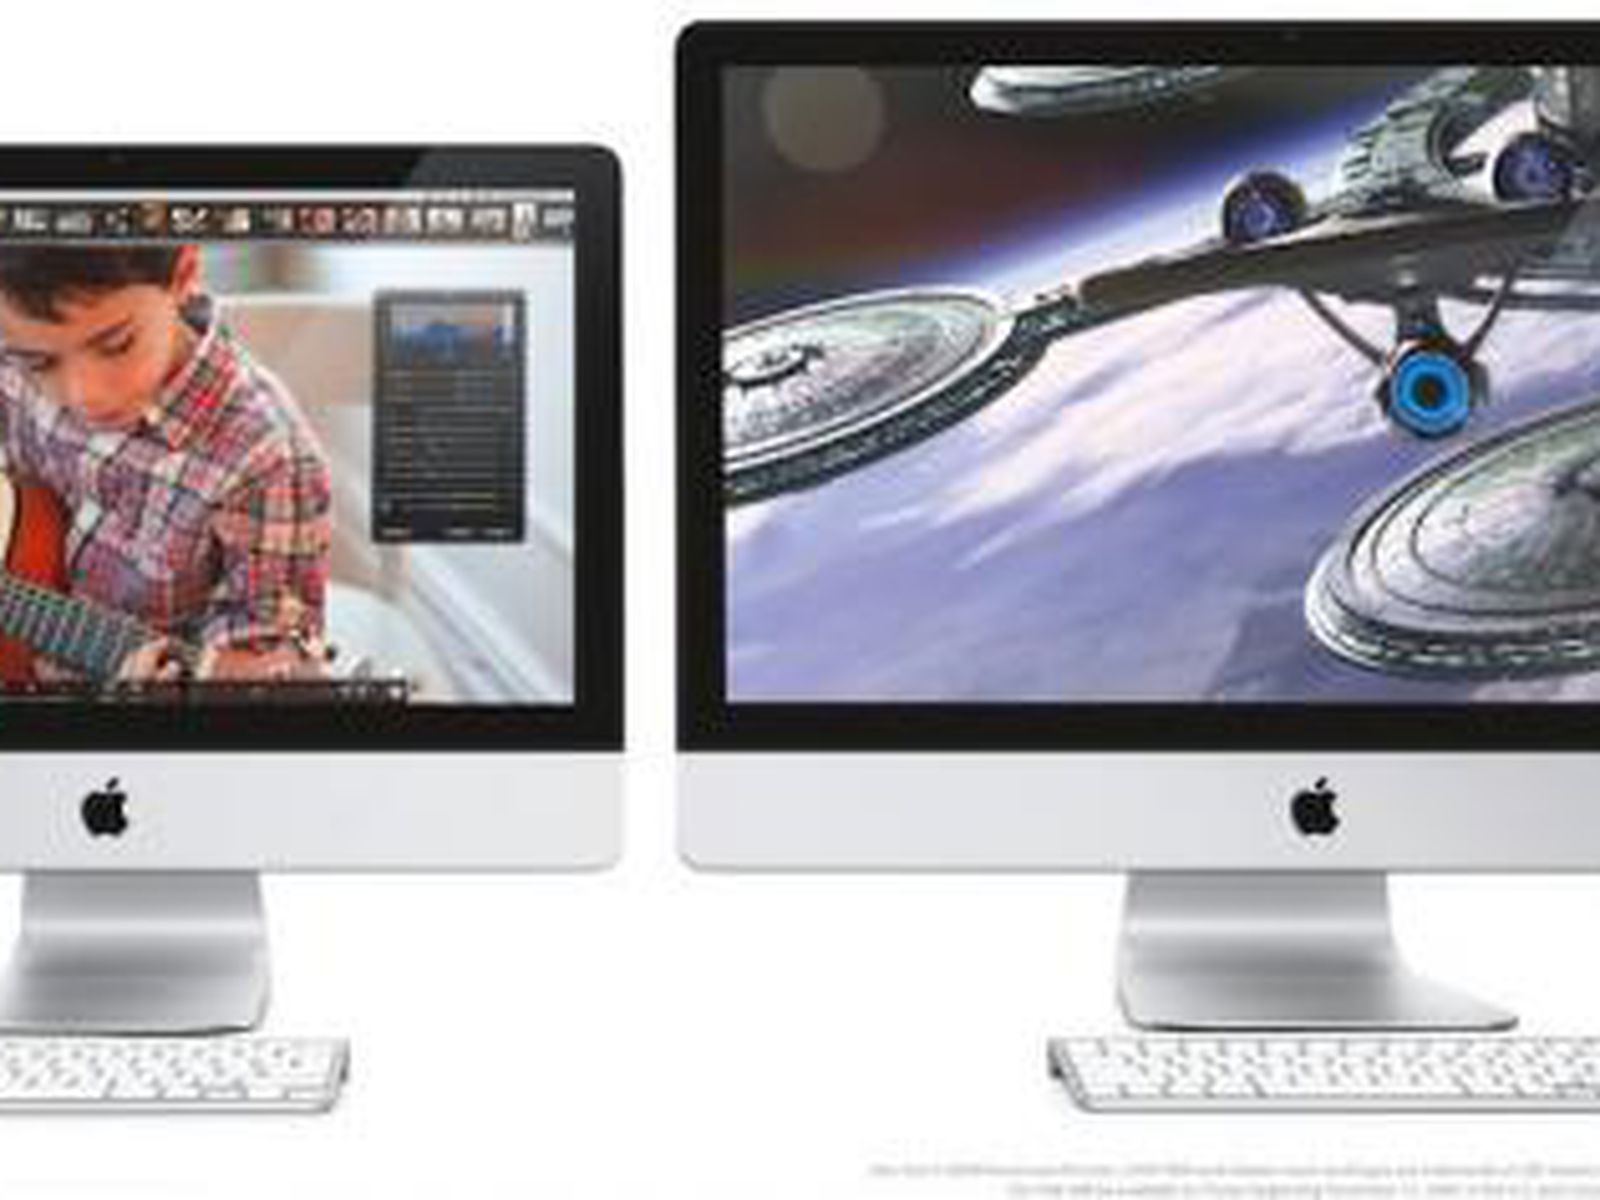 Apple Releases Updated iMac Models With 21.5- and 27-Inch LED 